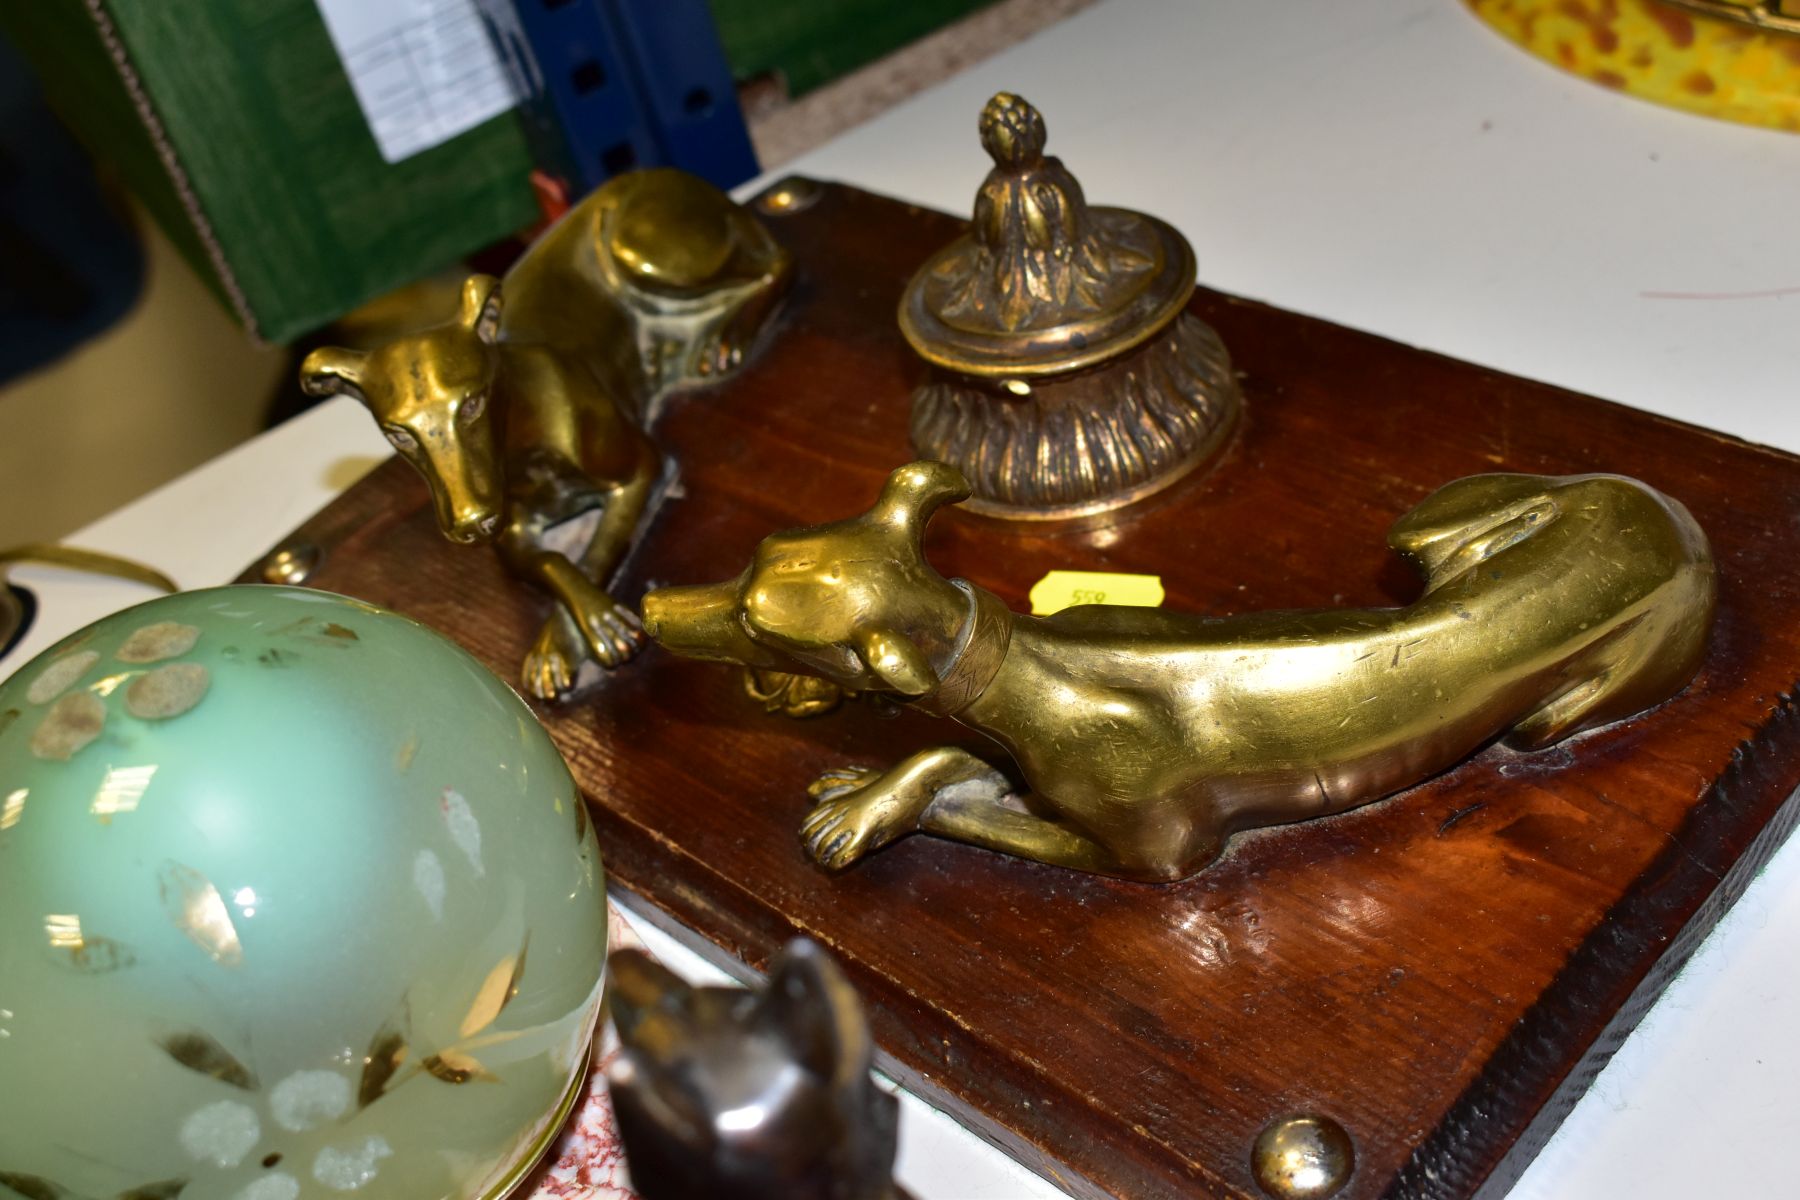 AN ART DECO DESK LAMP DEPICTING A PAIR OF BRONZED ALSATIAN DOGS MOUNTED TO A MARBLE PLINTH, - Image 7 of 8